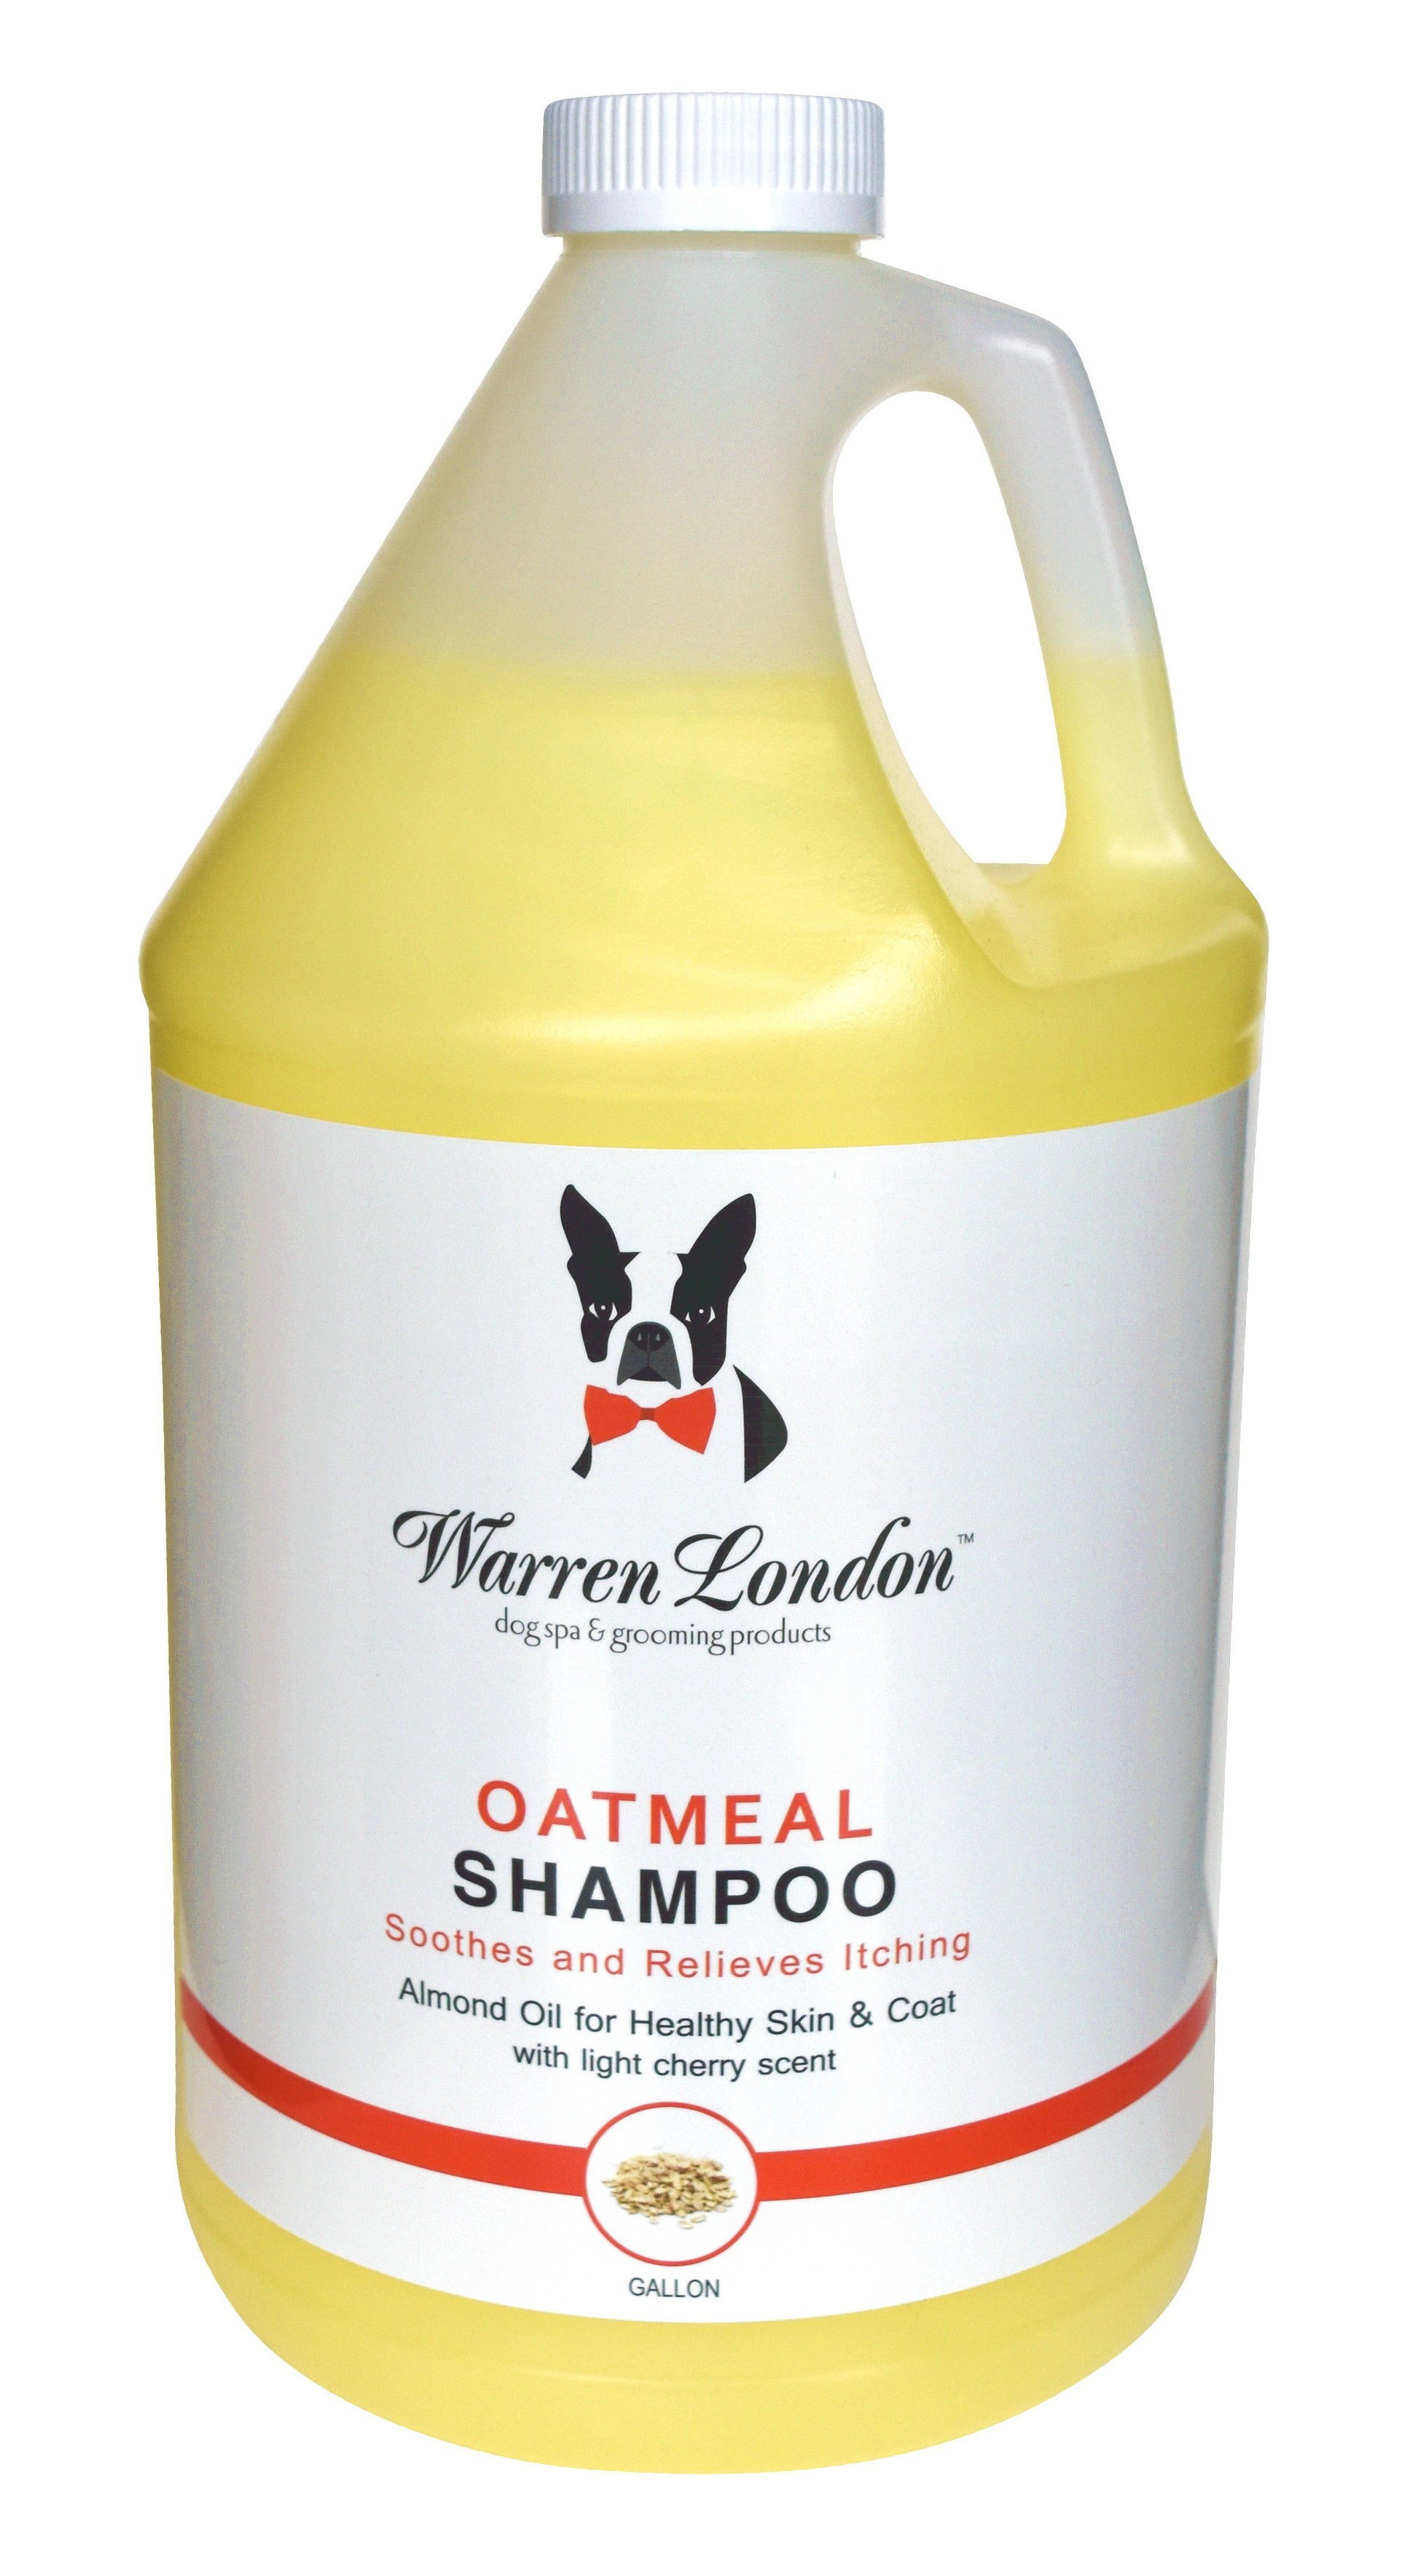 Oatmeal Shampoo - Cherry Scented - Professional Size Grooming Size Product Warren London 